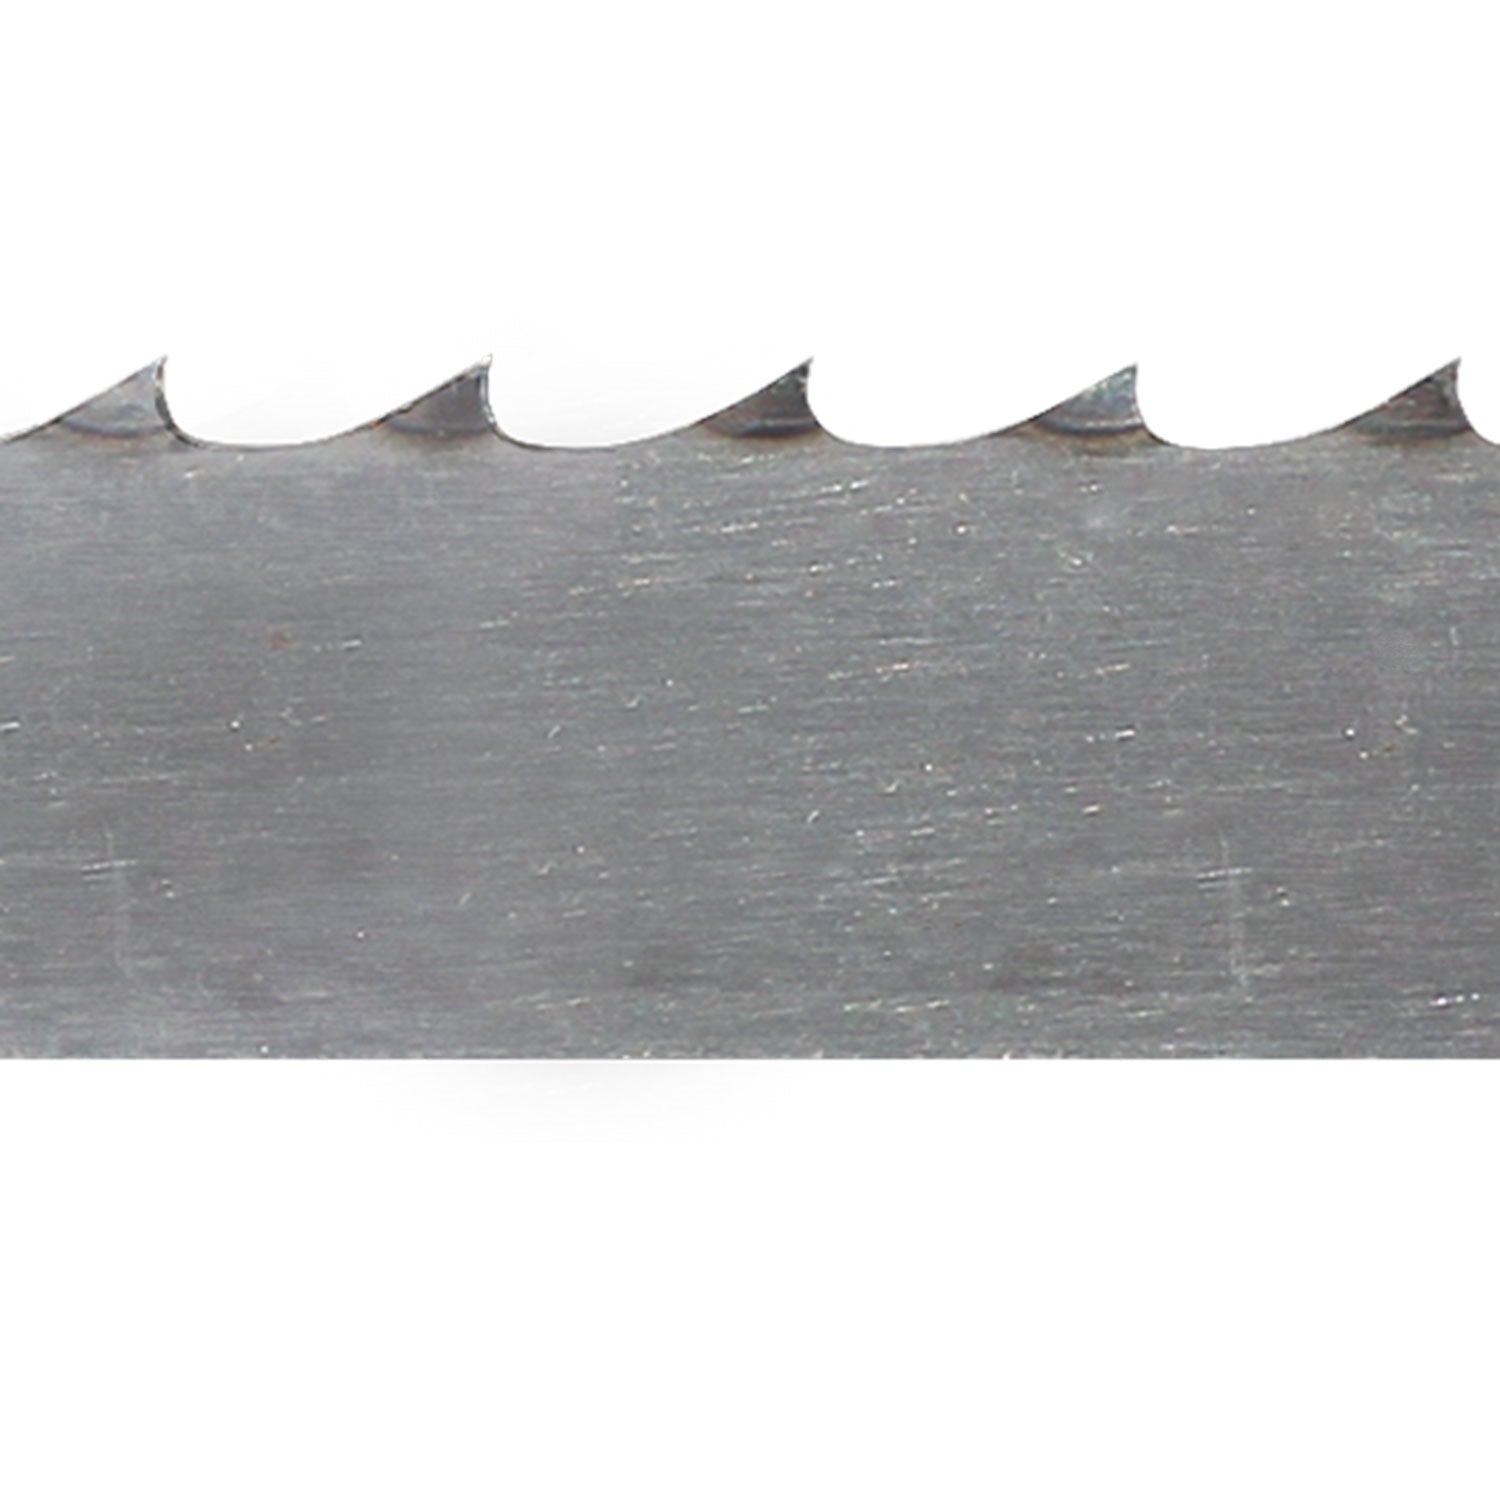 Meat Band Saw Blade - One Way® Portion Control - 142 in. x 5/8 in. x 0.022 in. x 3 TPI HPO - Pack of 4